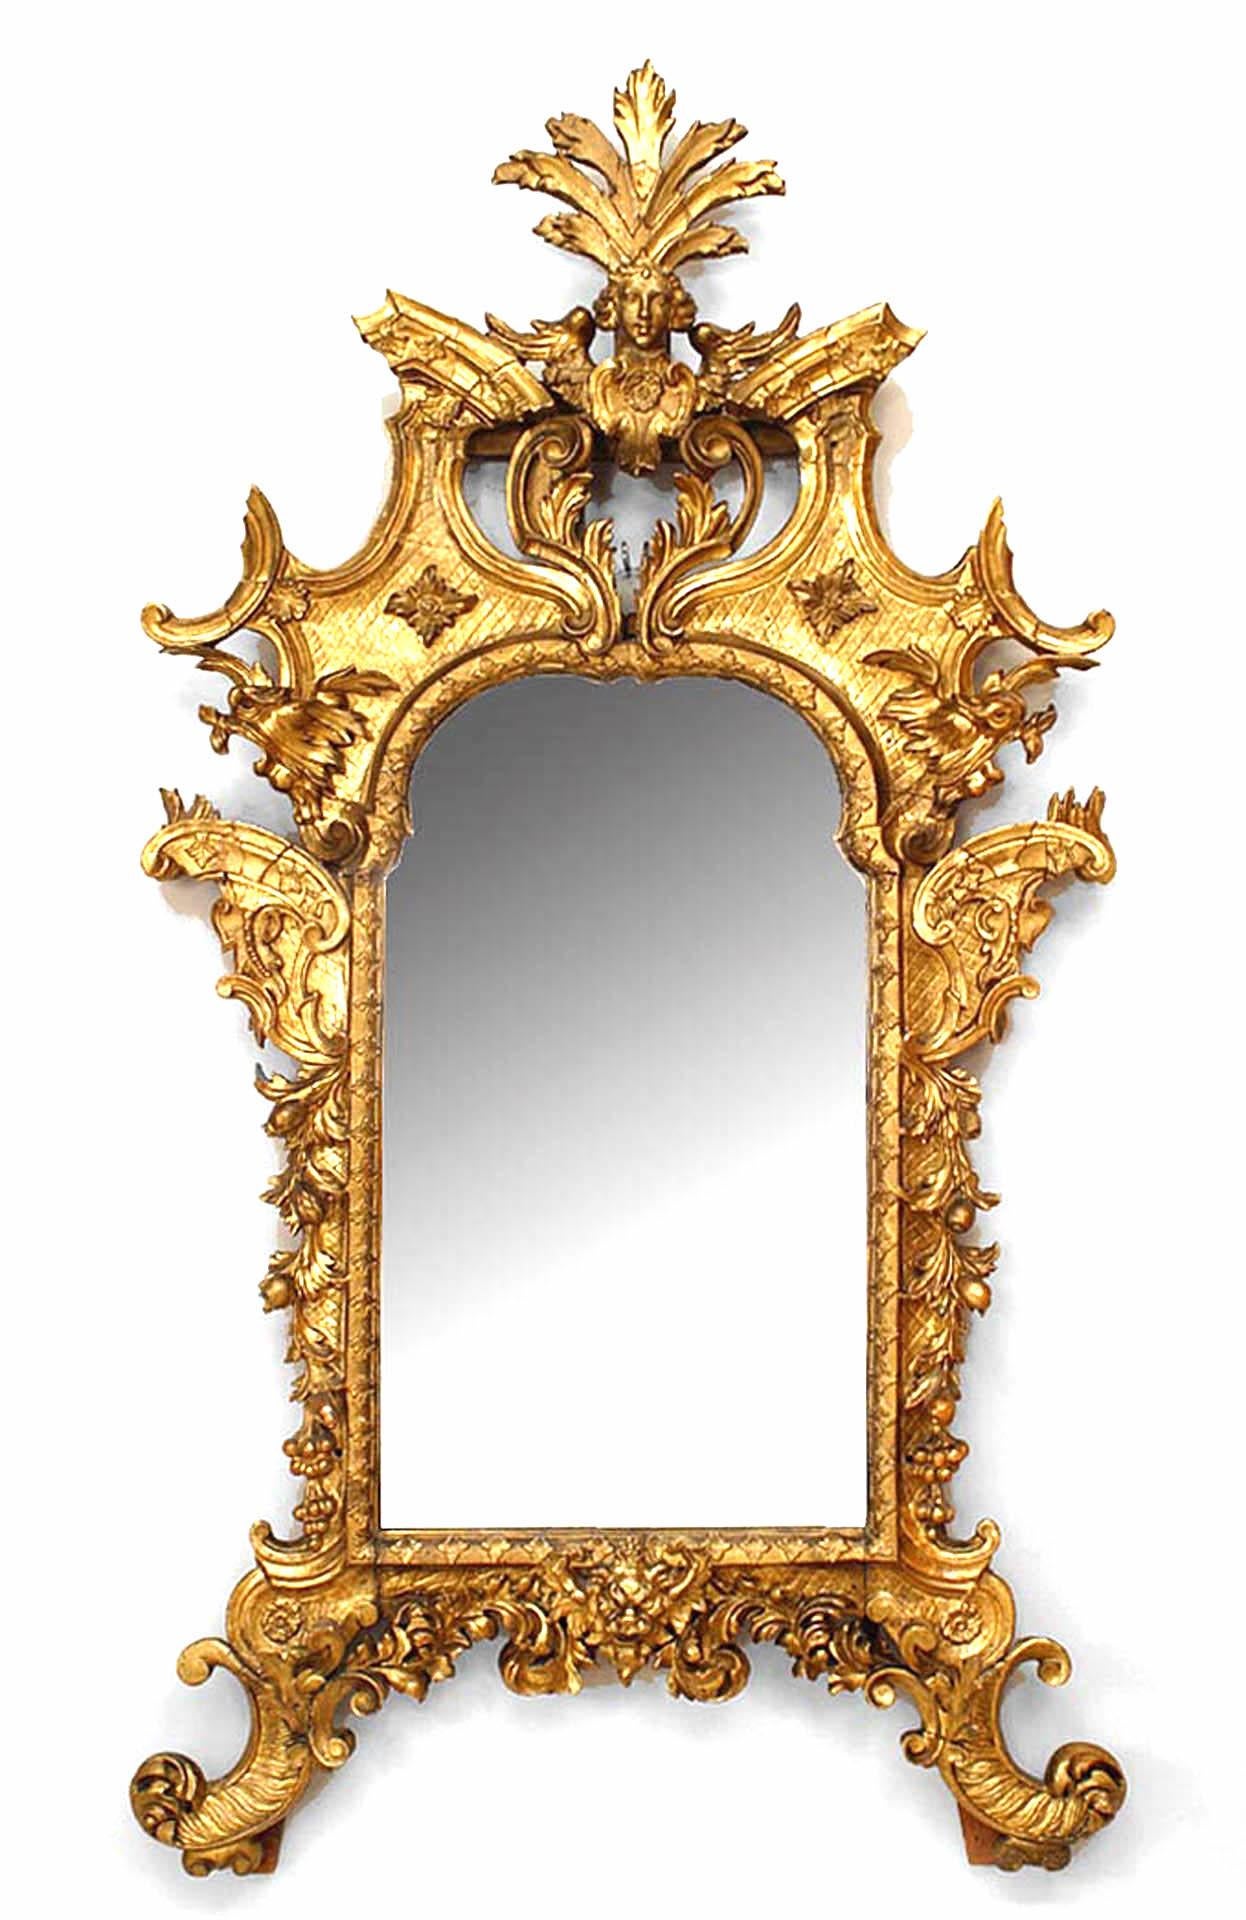 Italian Rococo (Florence, mid-18th Century) giltwood wall mirror with a carved scroll and floral motif and an Apollo mask crest pediment.
